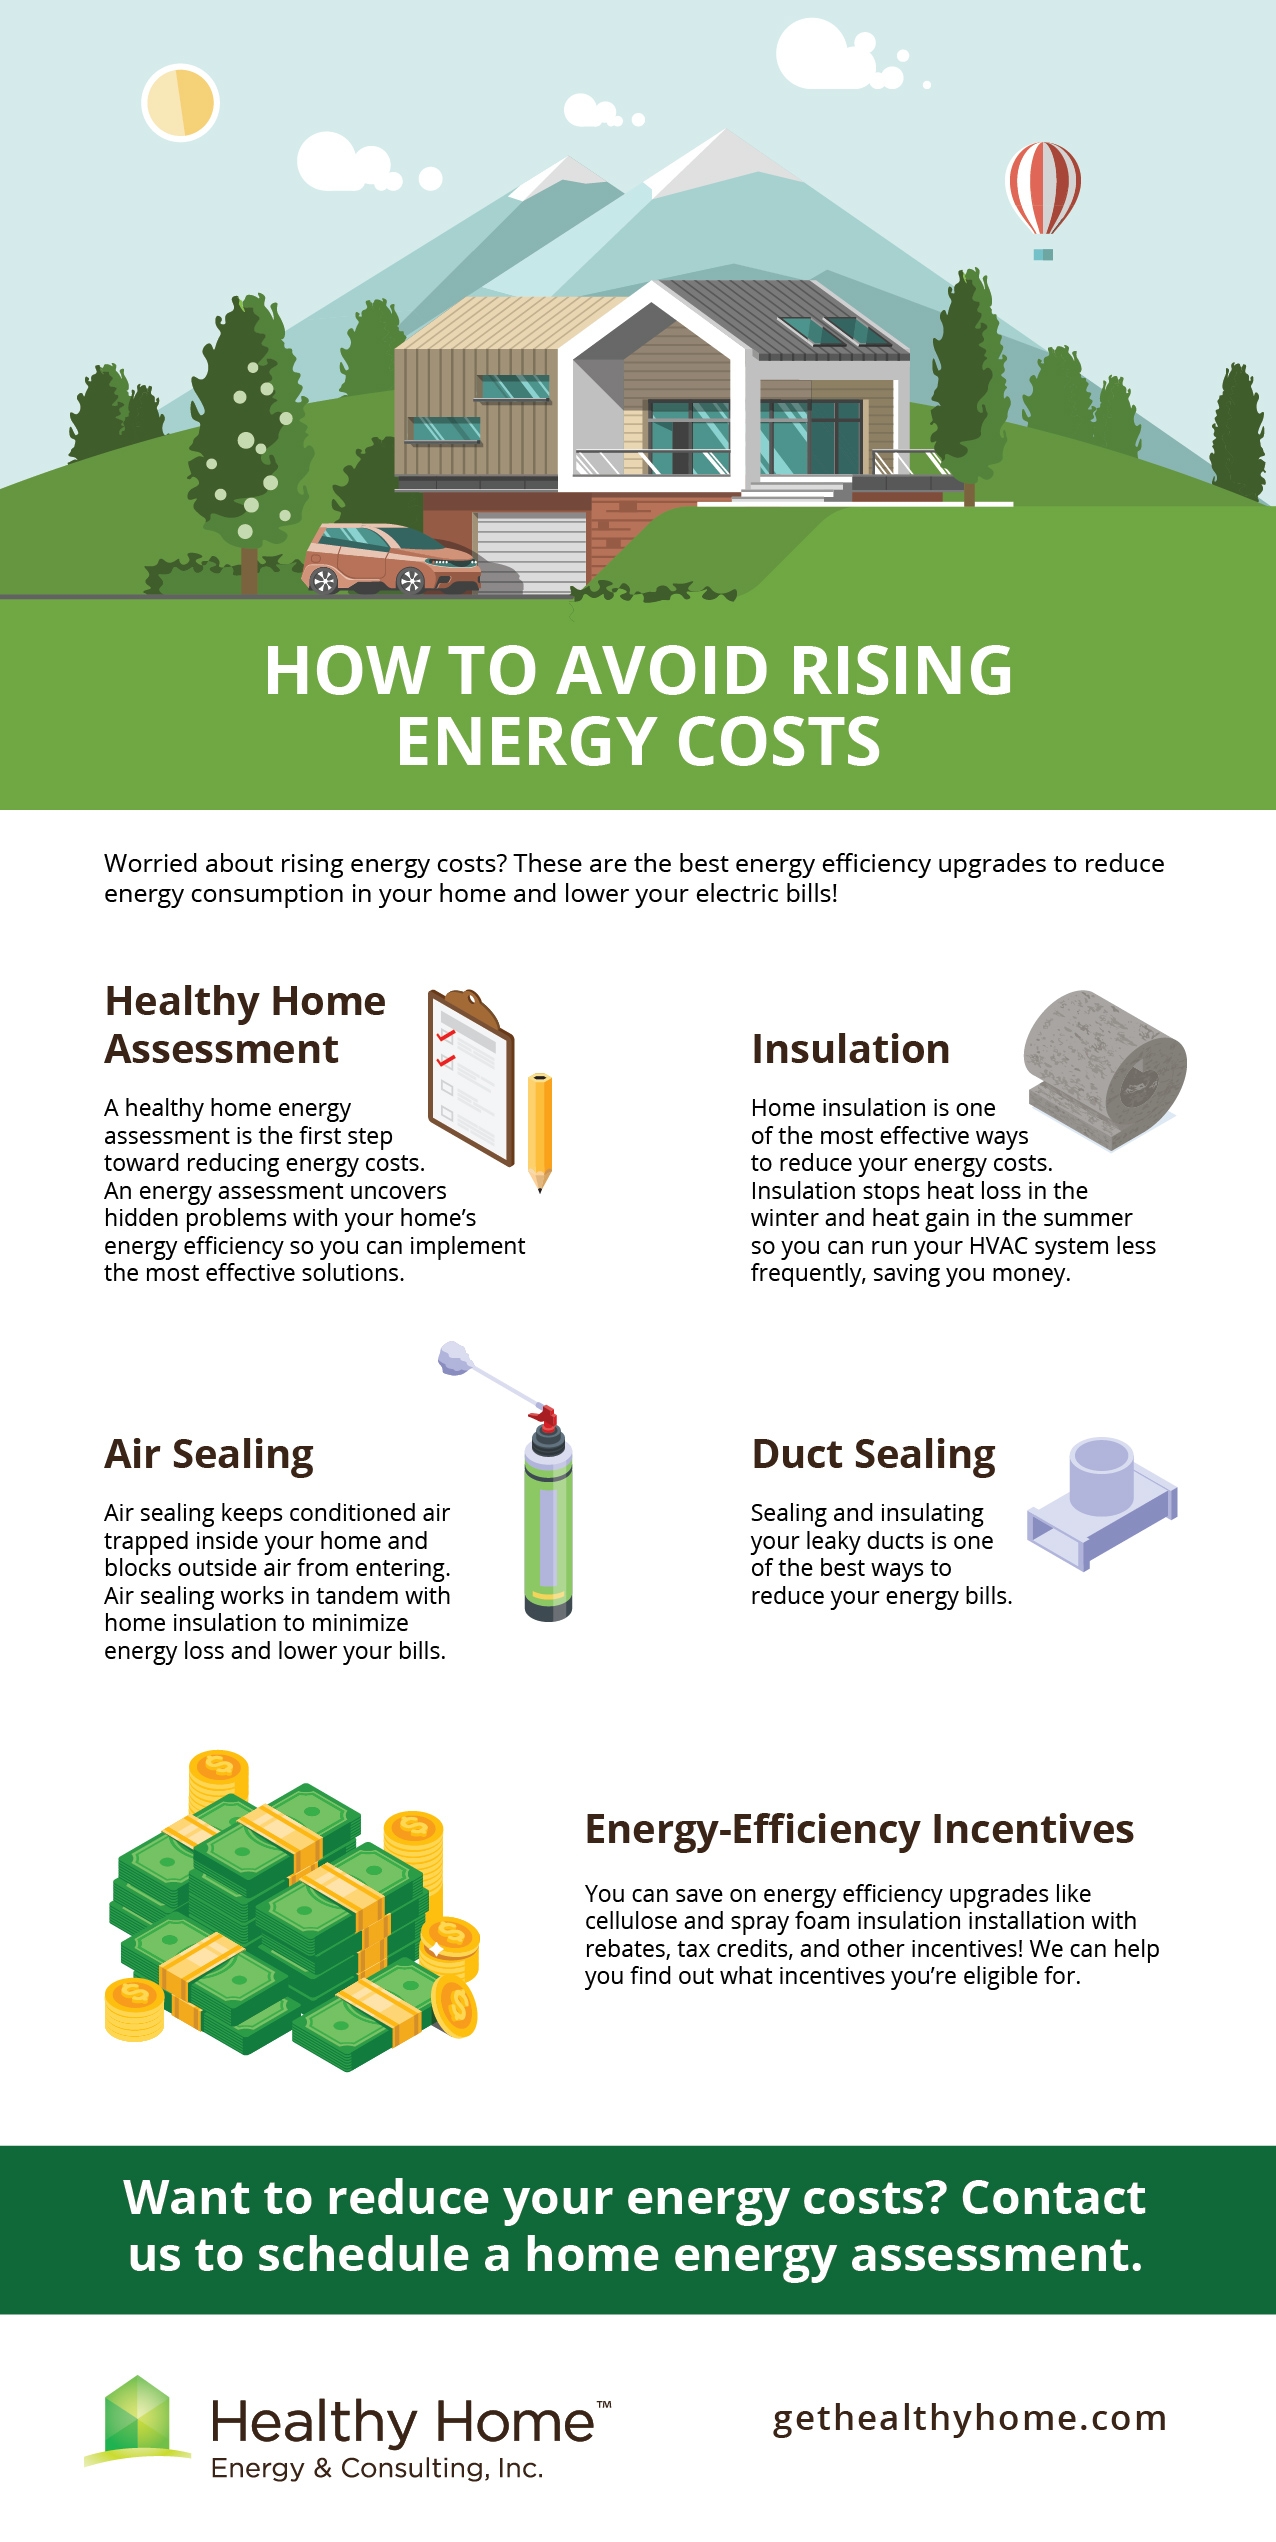 How to Avoid Rising Energy Costs infographic